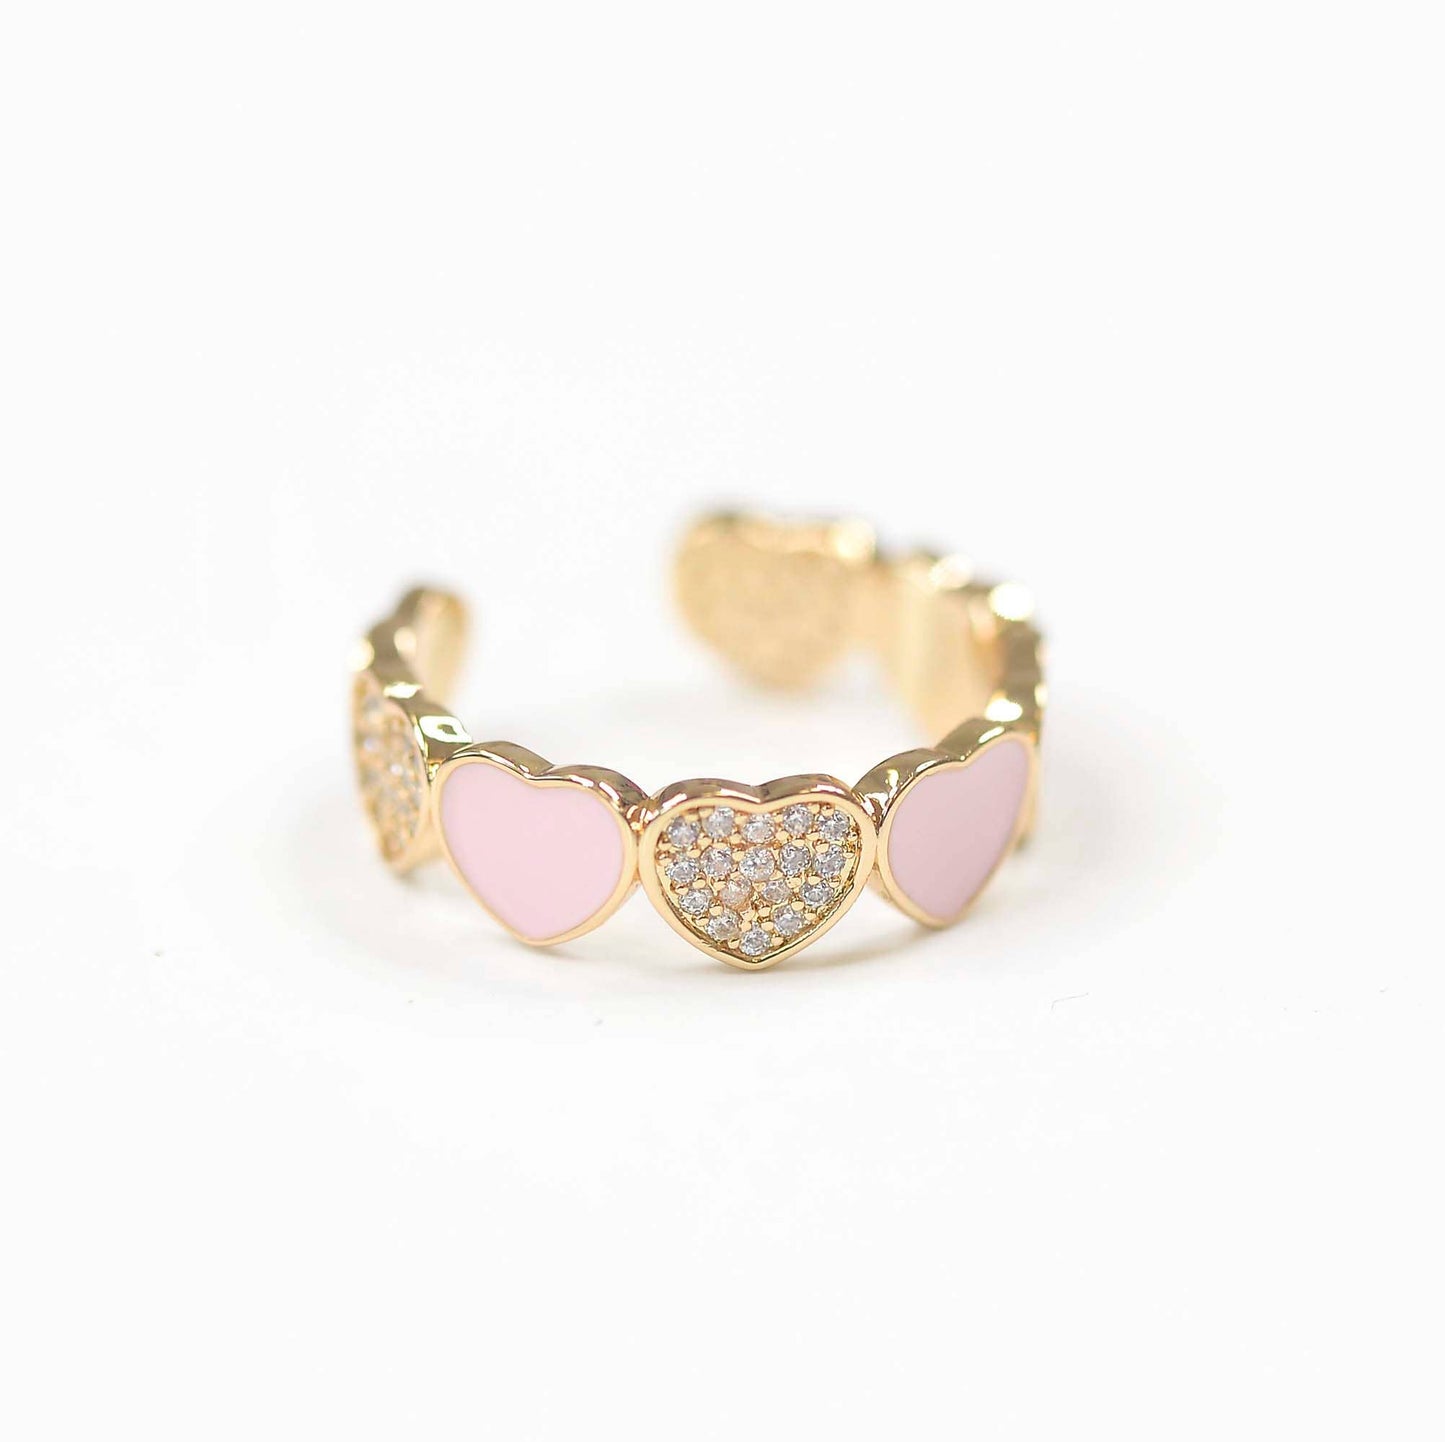 Heart Adjustable Ring, Cute Fun Ring, Stackable Ring